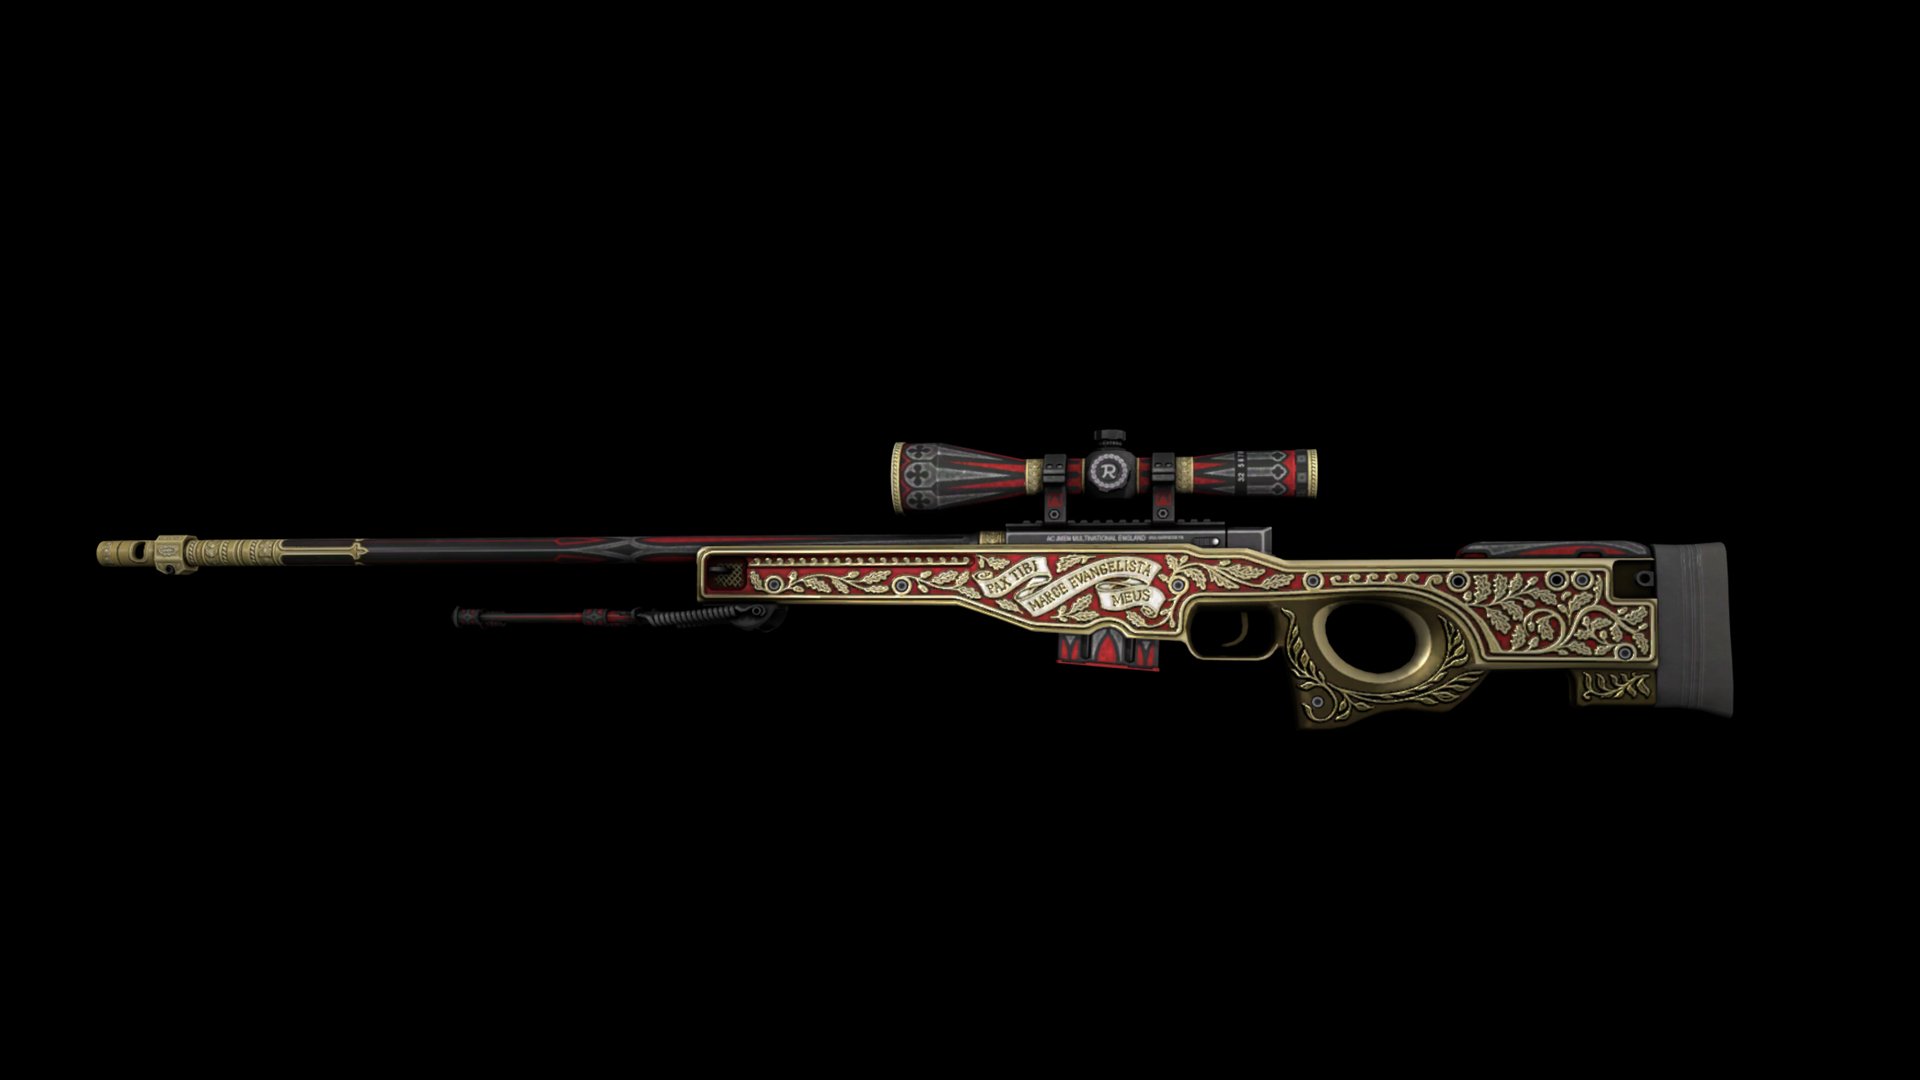 Awp Pictures